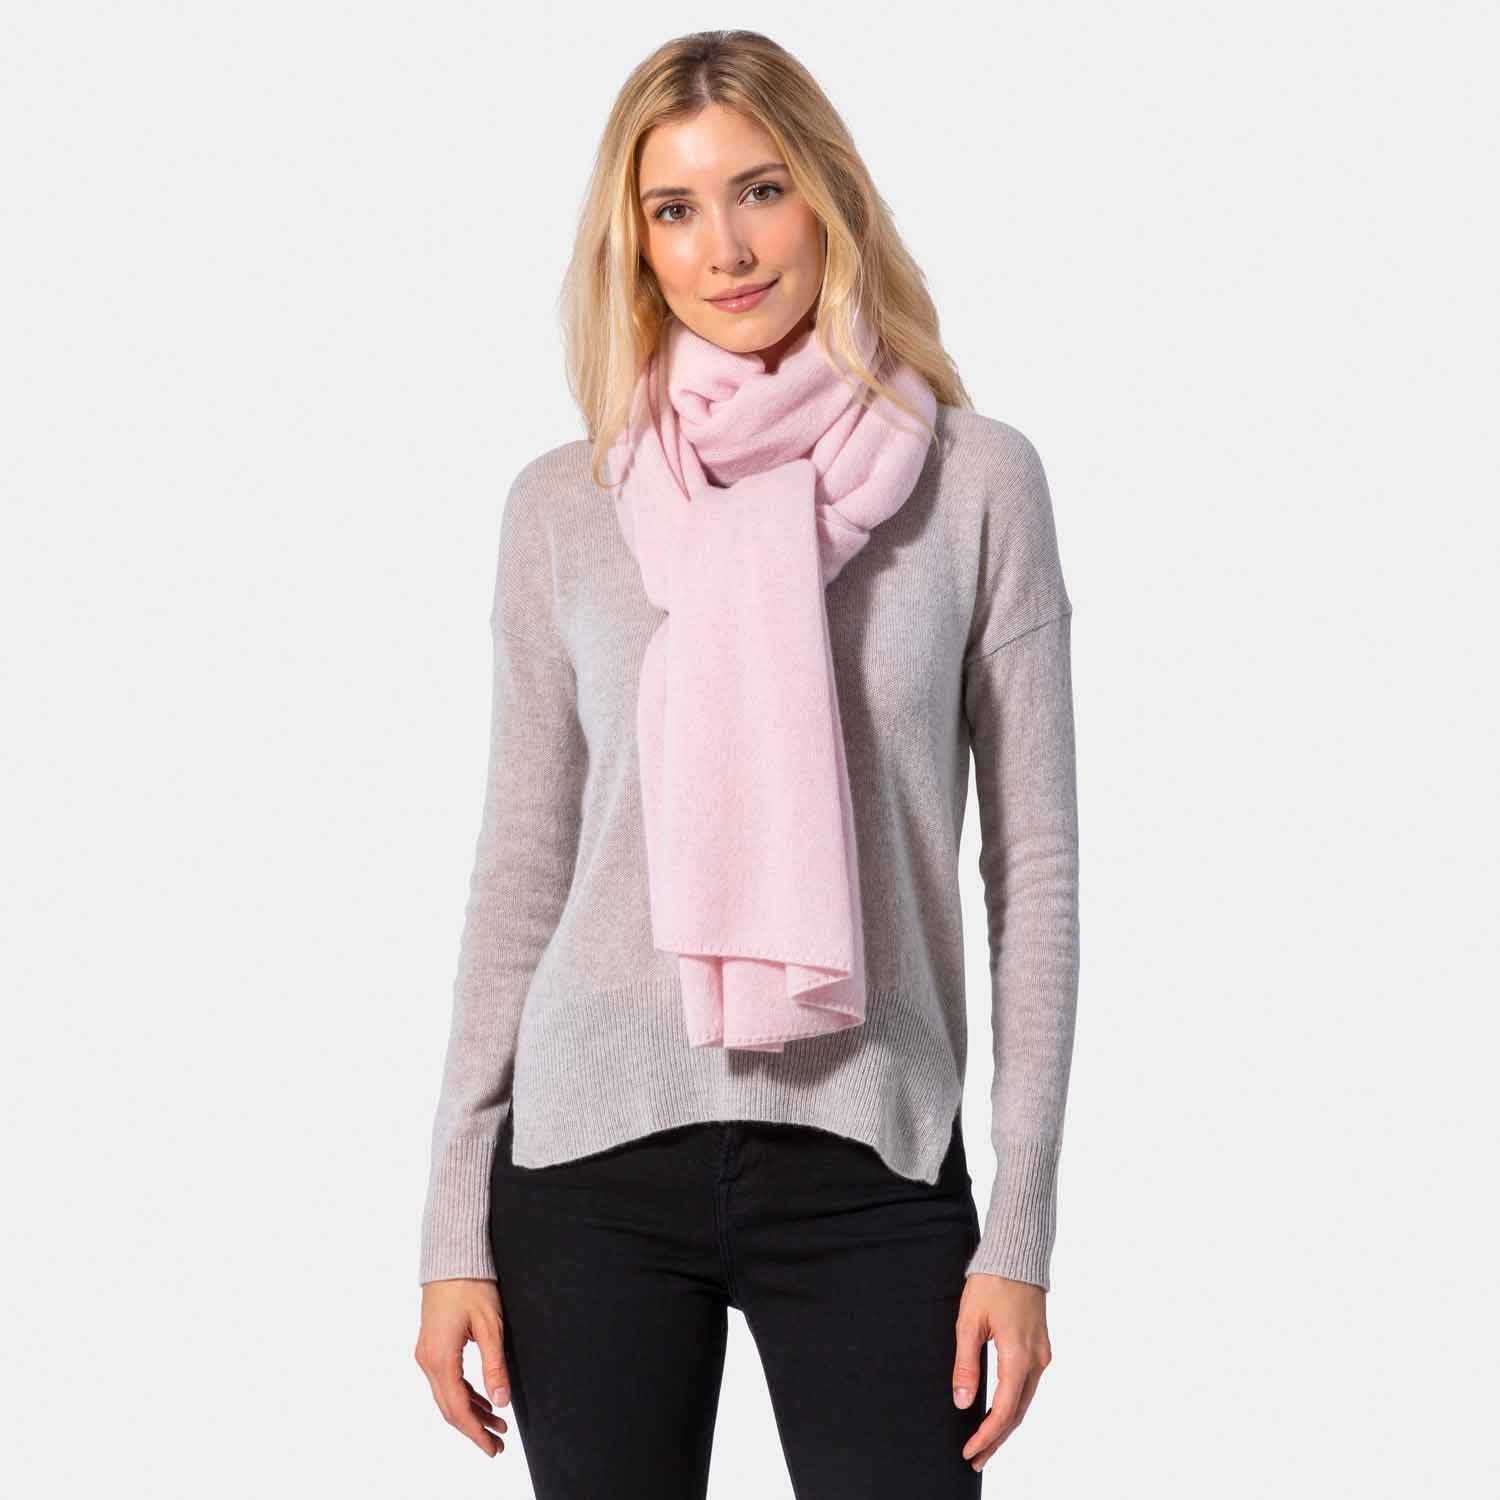 Picture of a woman wearing a grey cashmere jersey knitted oversize scarf or travel wrap.